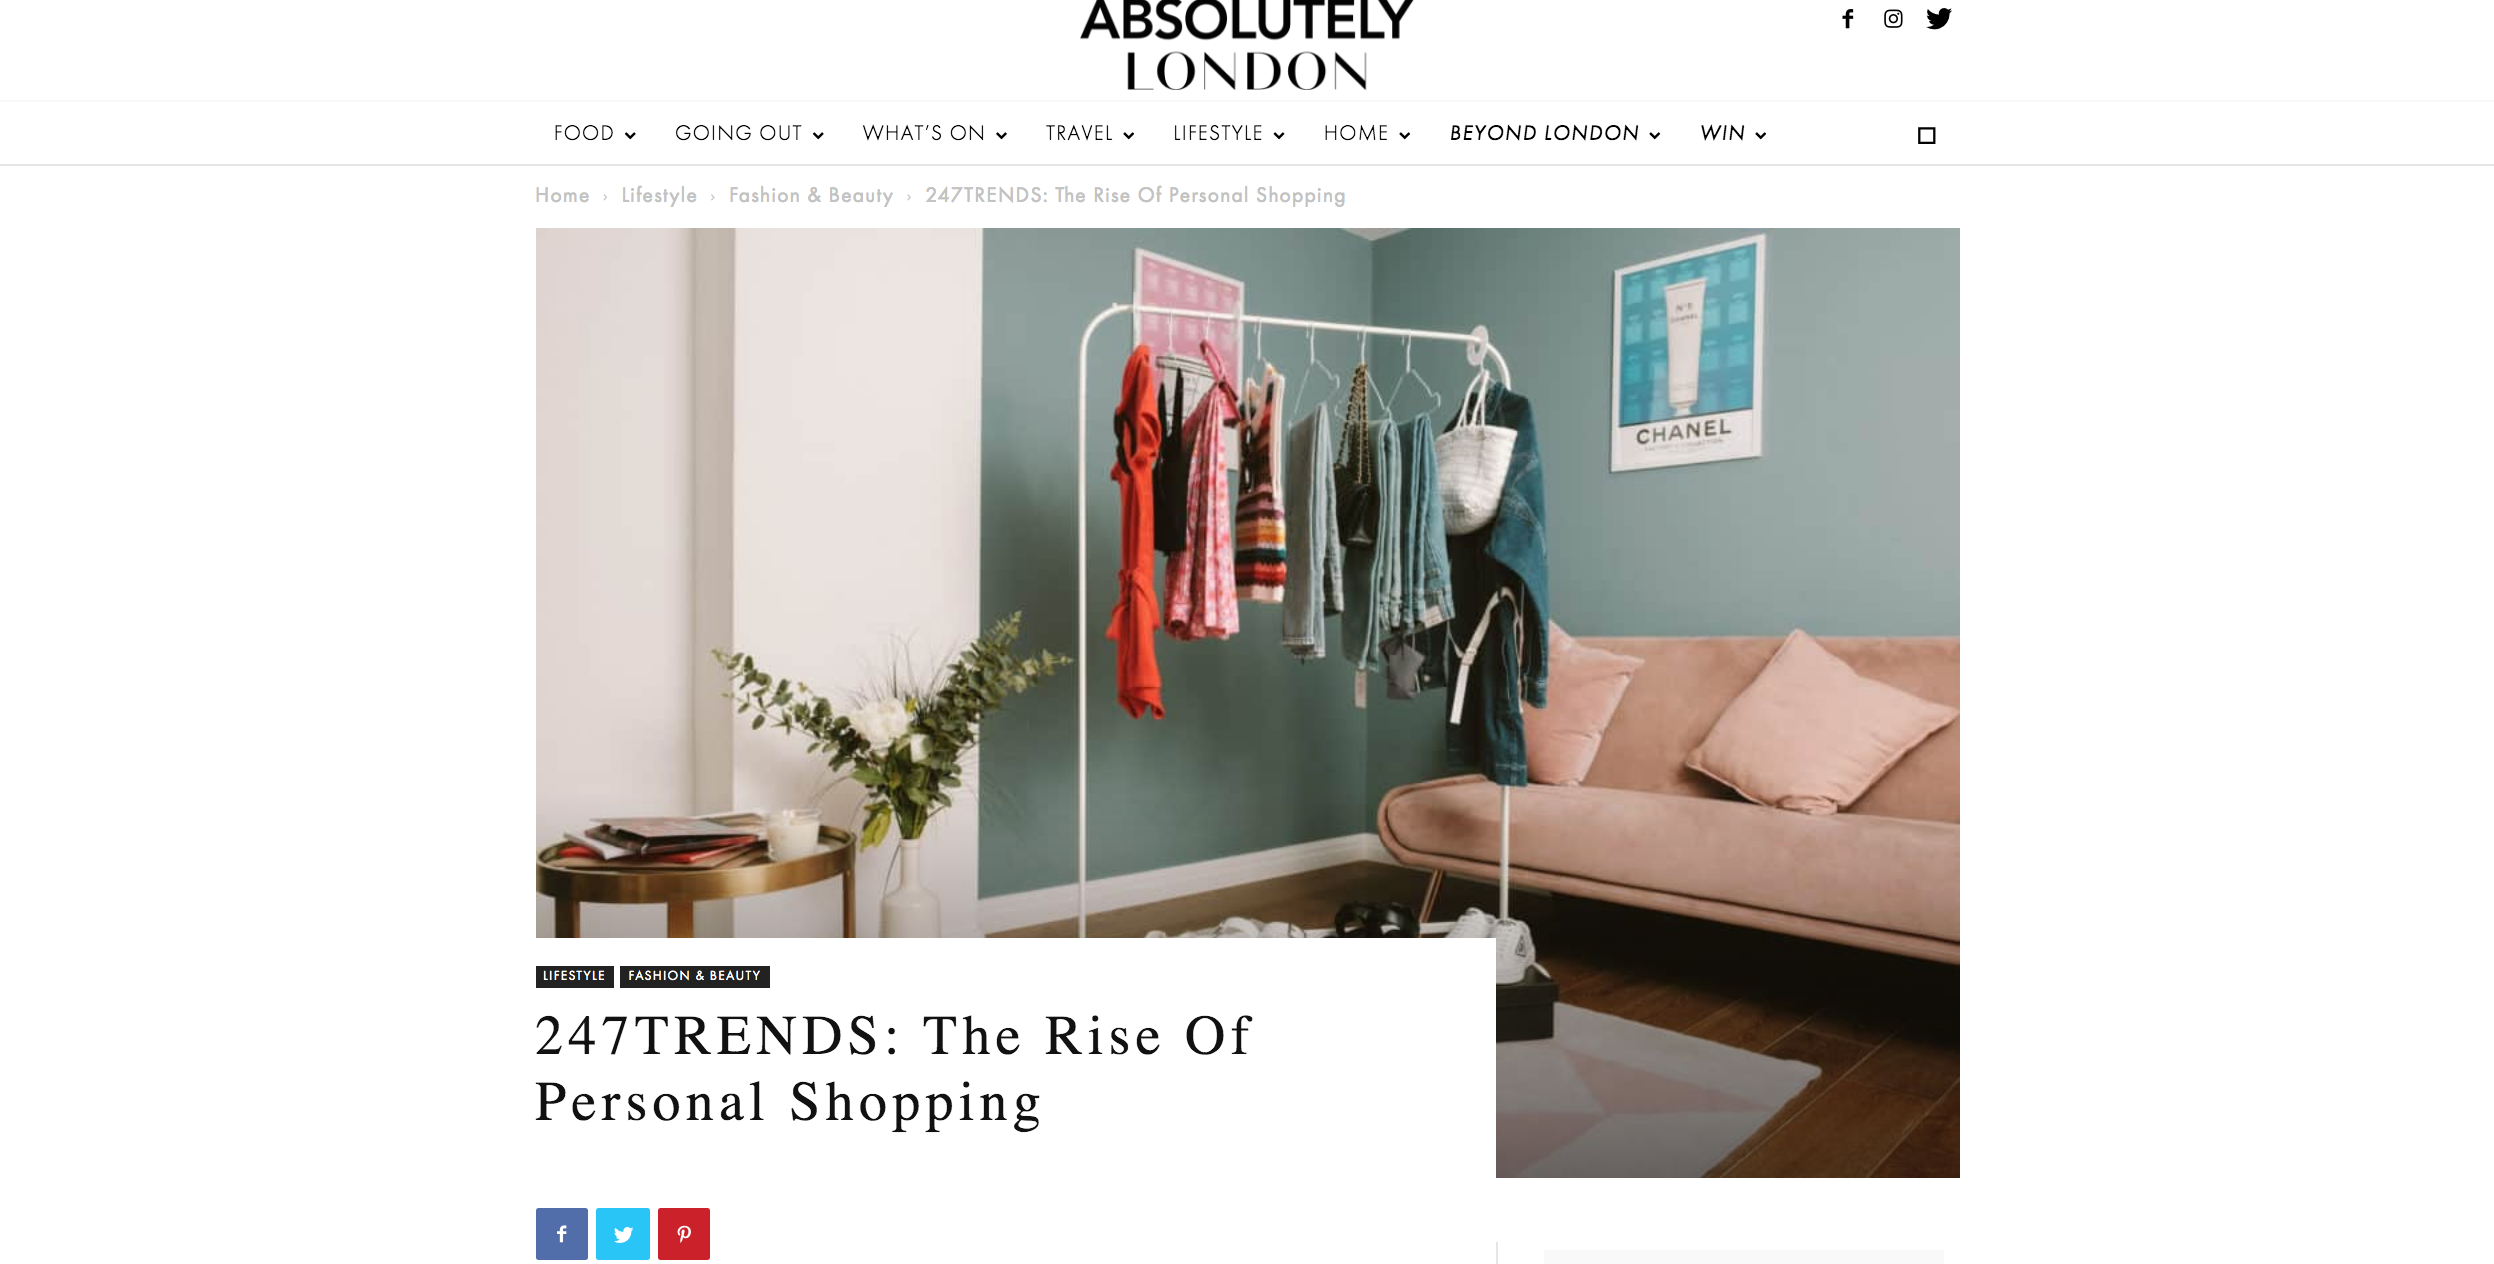 FireShot Capture 668 - 247TRENDS_ The Rise Of Personal Shopping - Absolutely.London_ - absolutely.london.png